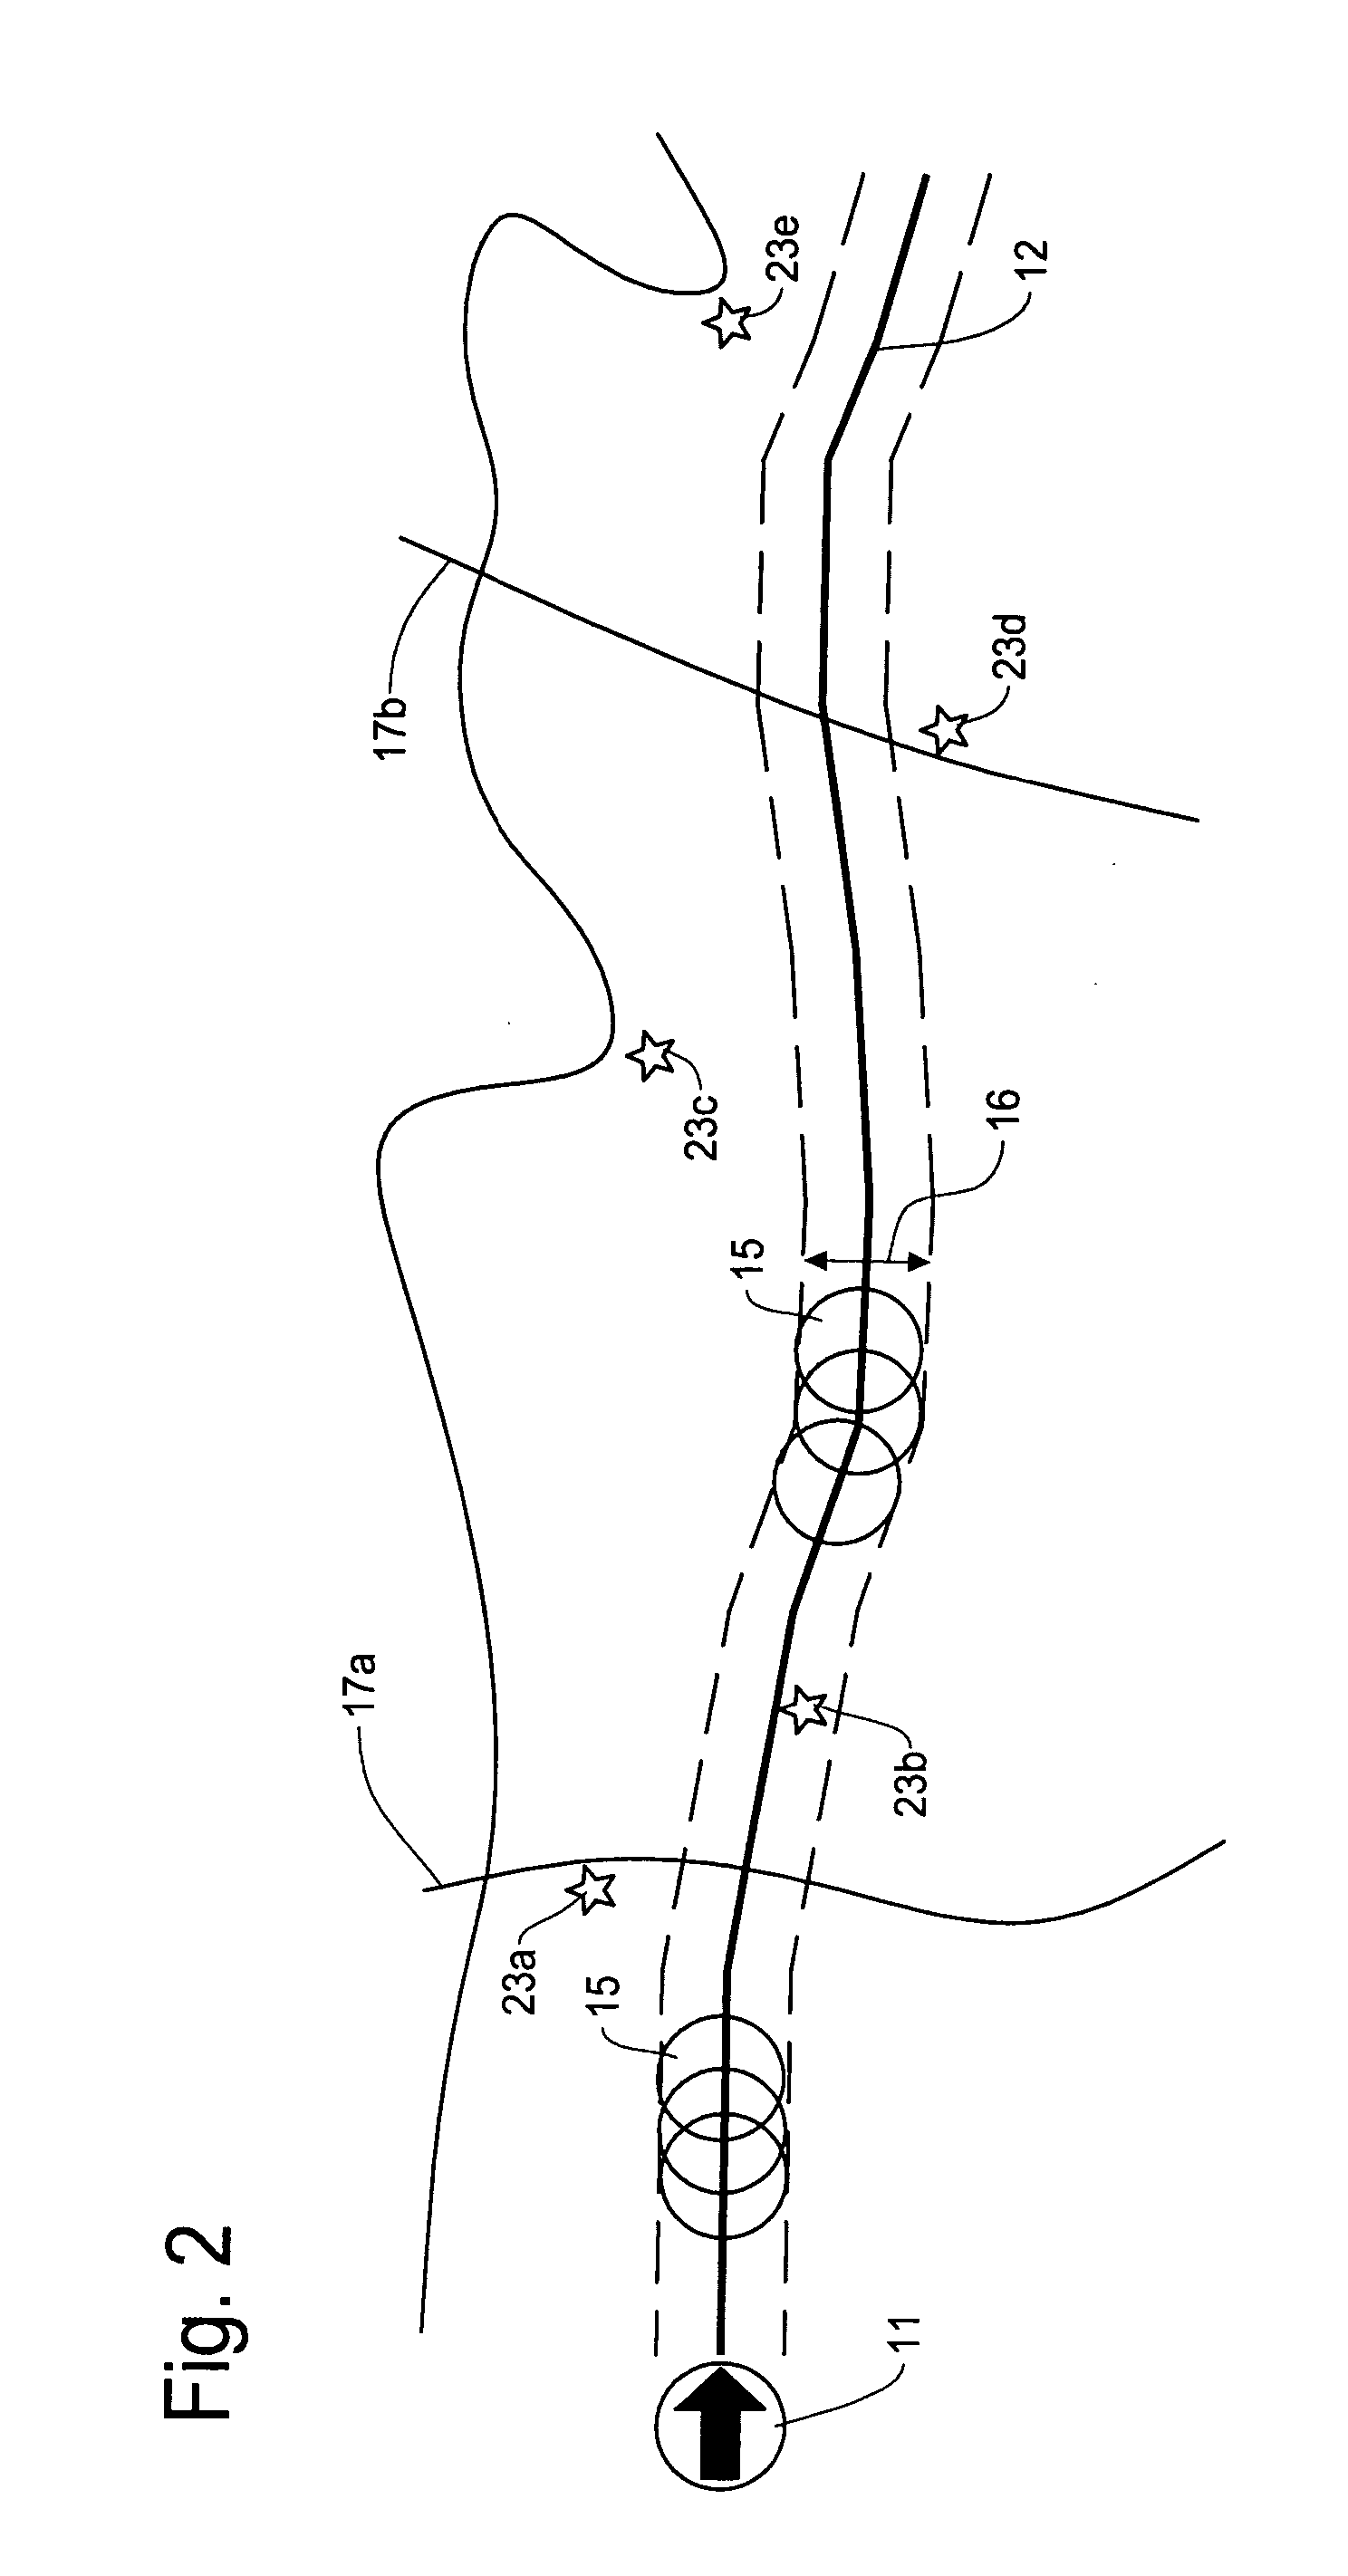 Method and apparatus for navigation system for searching selected type of information along route to destination